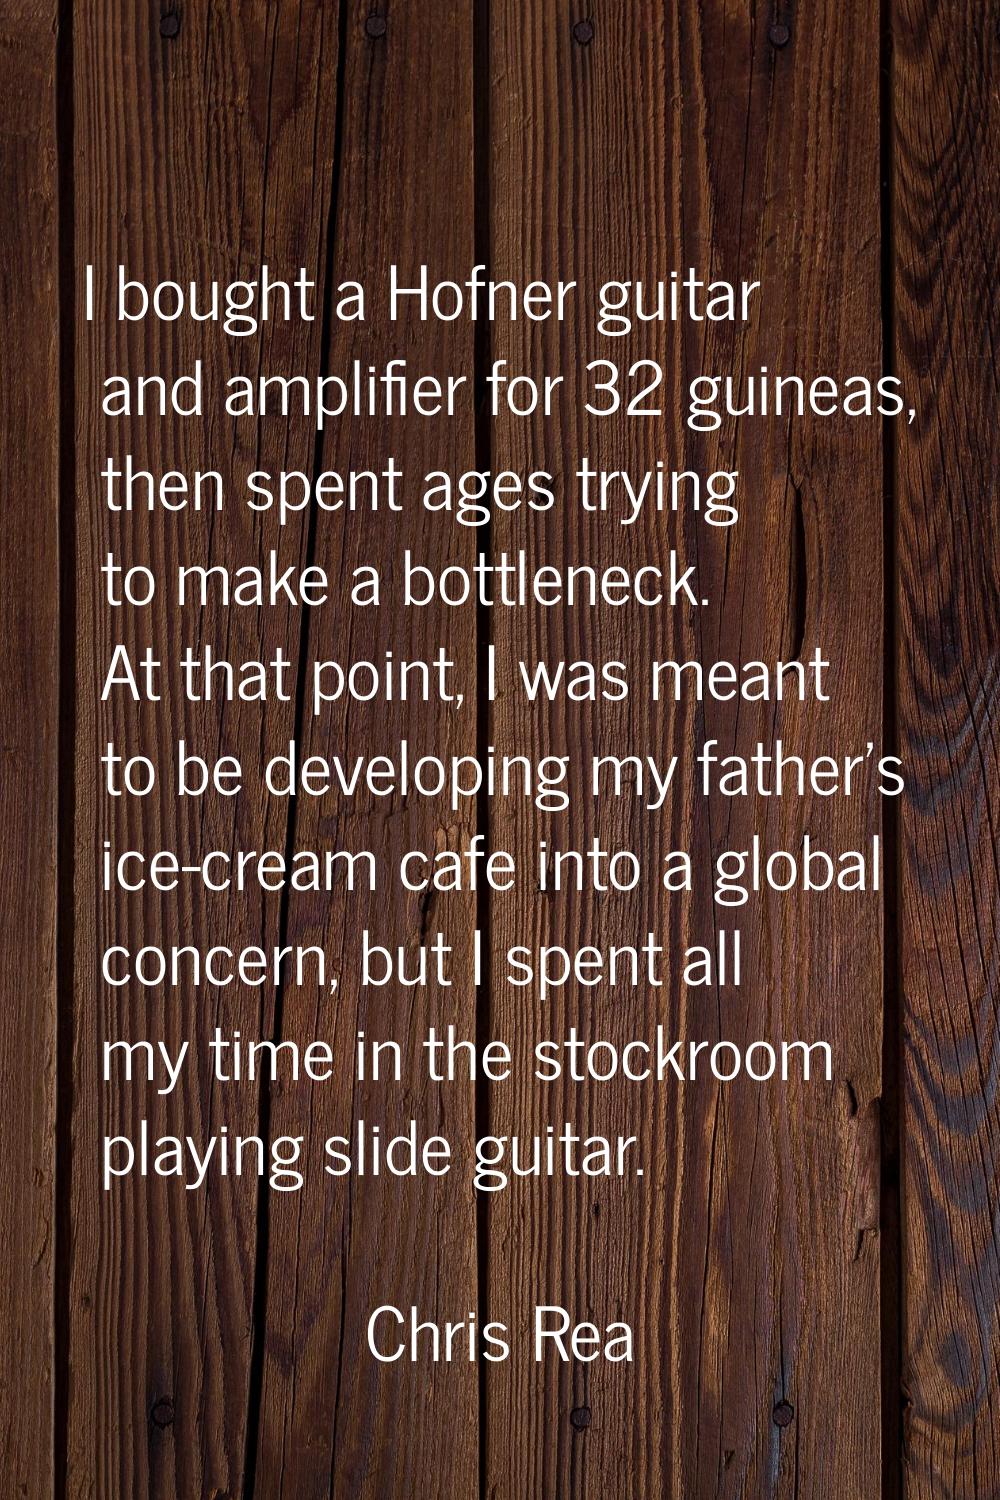 I bought a Hofner guitar and amplifier for 32 guineas, then spent ages trying to make a bottleneck.